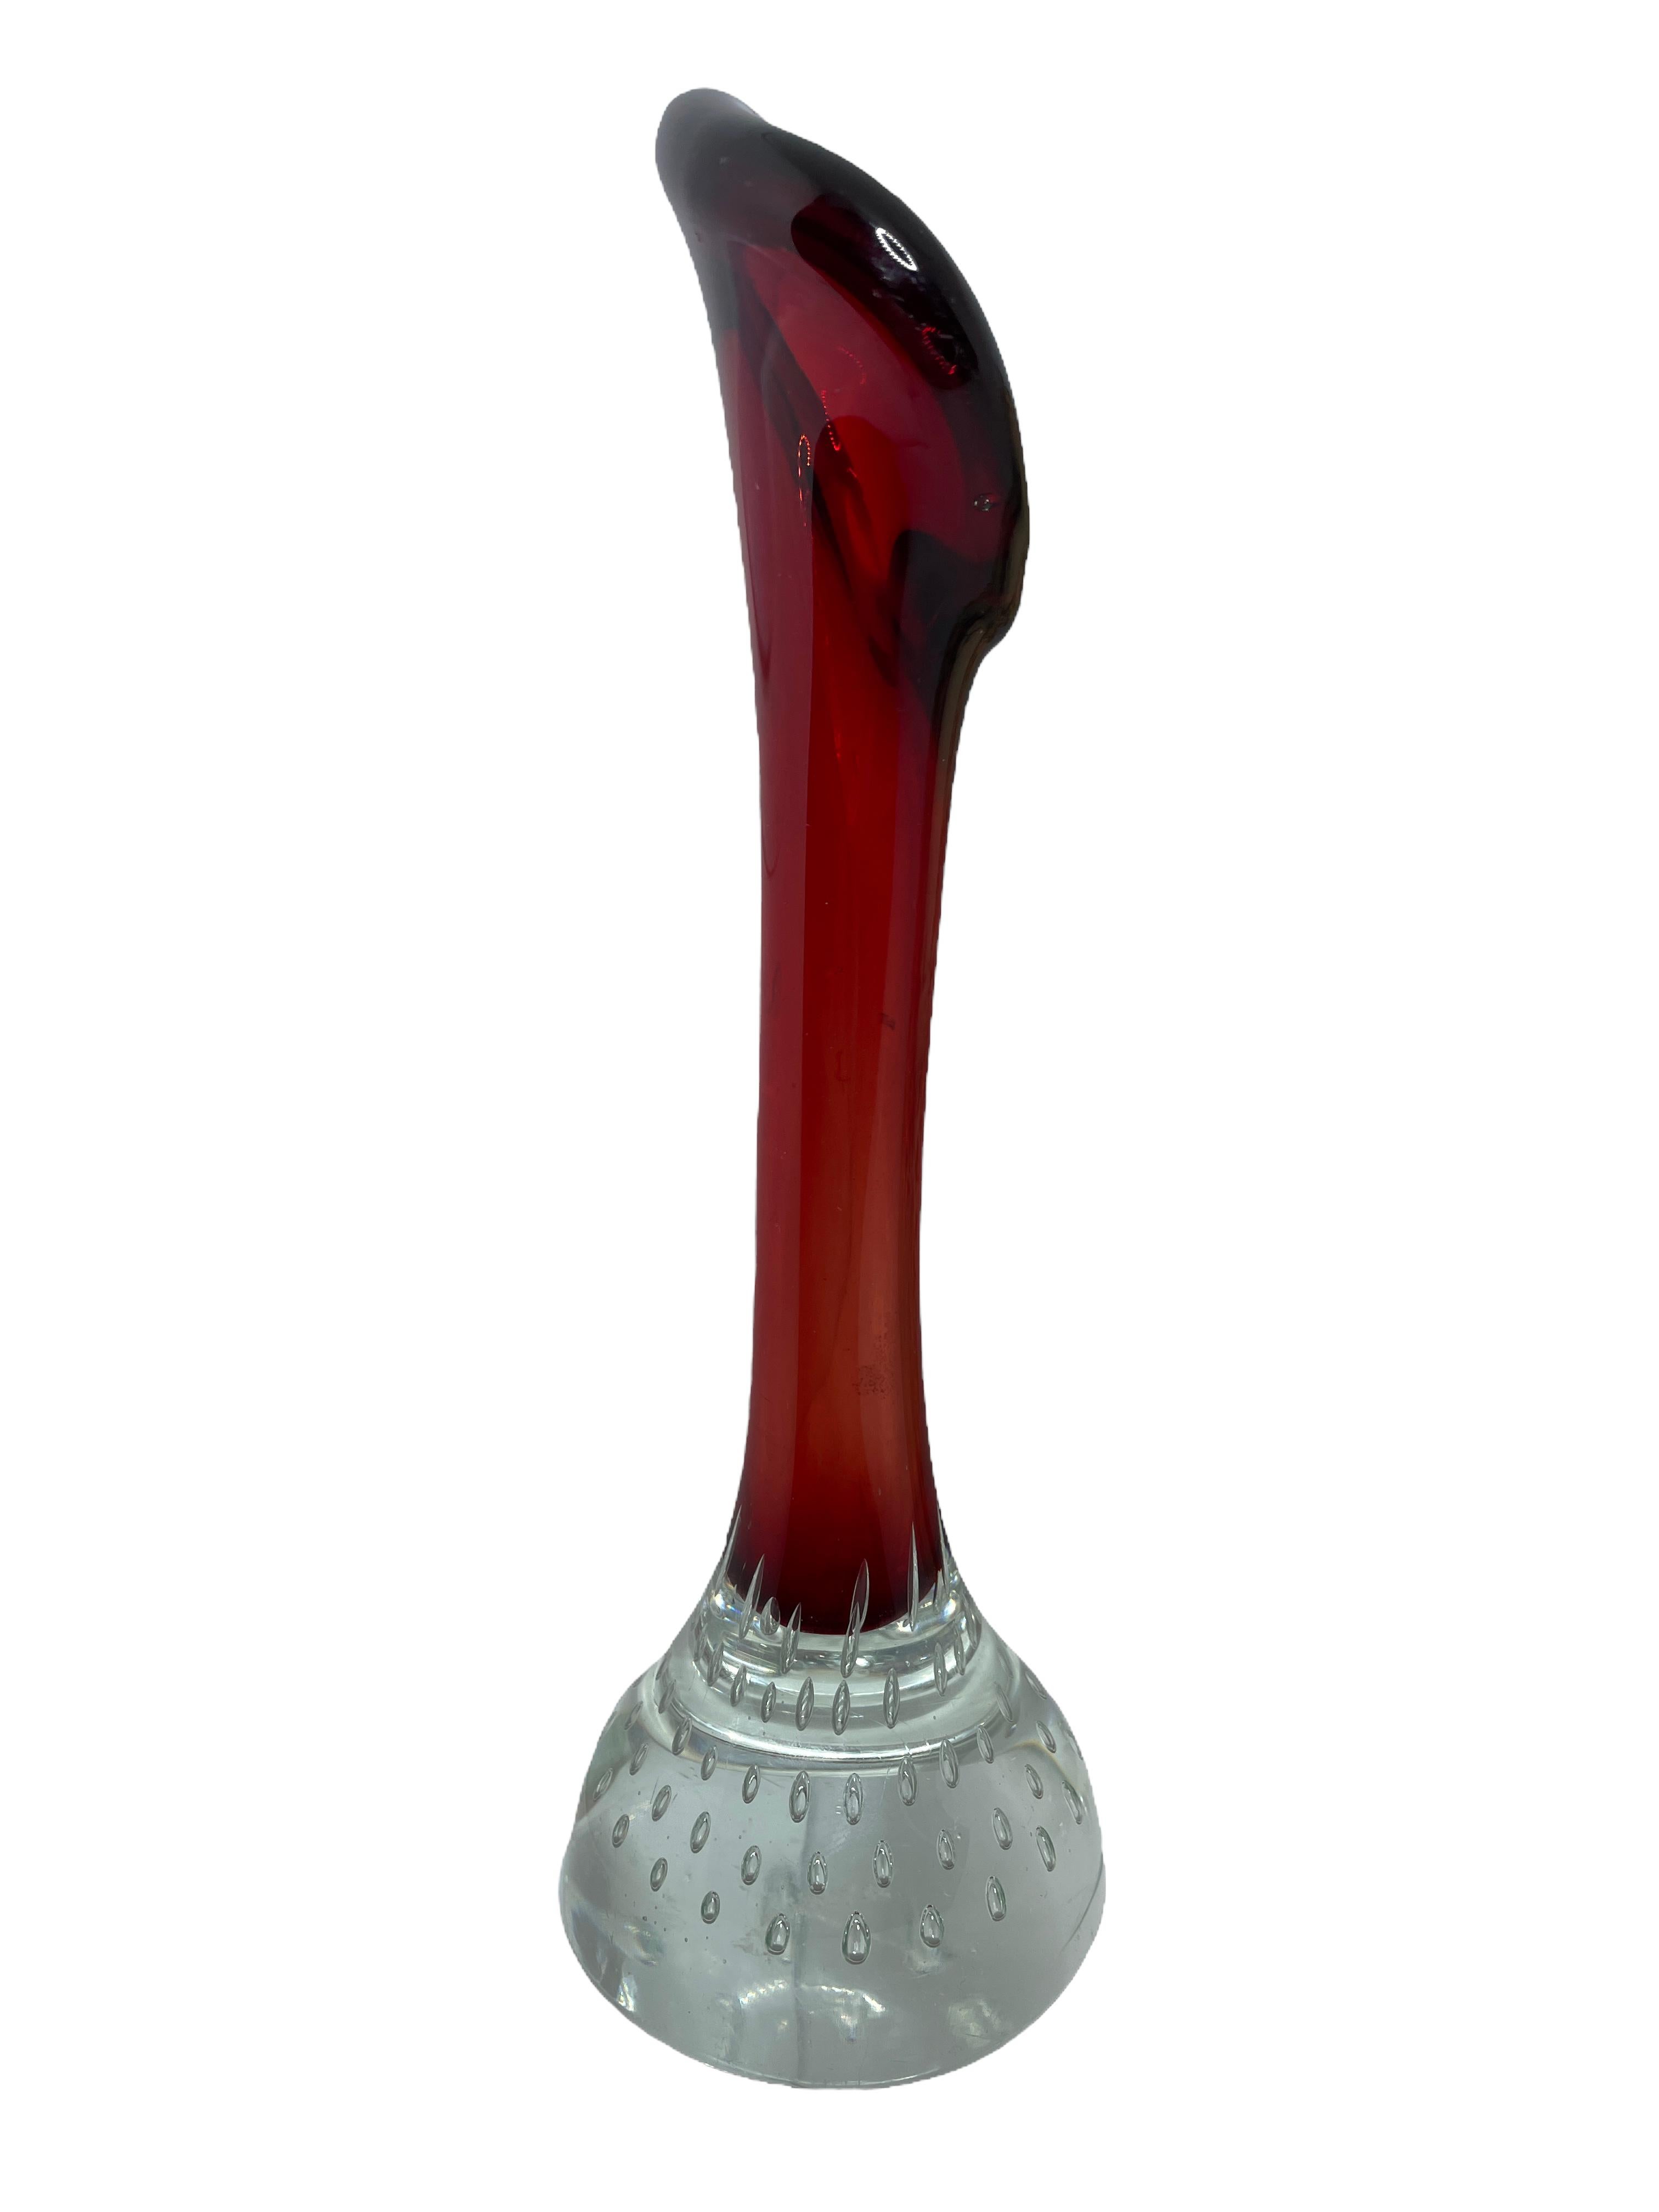 Midcentury Red & Clear Single Flower Sommerso Murano Glass Vase, Italy In Good Condition For Sale In Nuernberg, DE